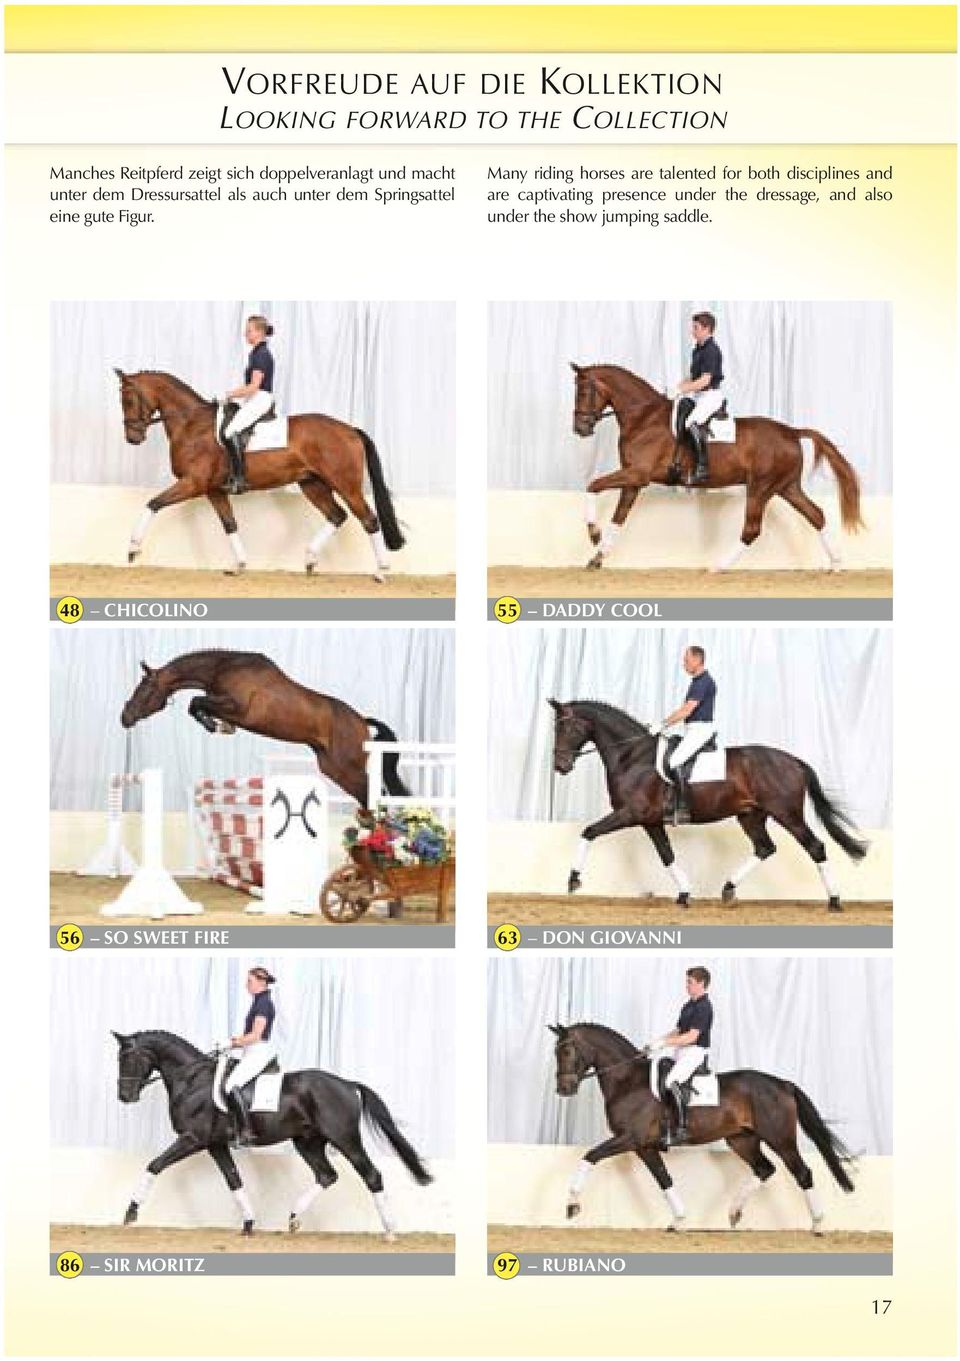 Many riding horses are talented for both discilines and are cativating resence under the dressage, and